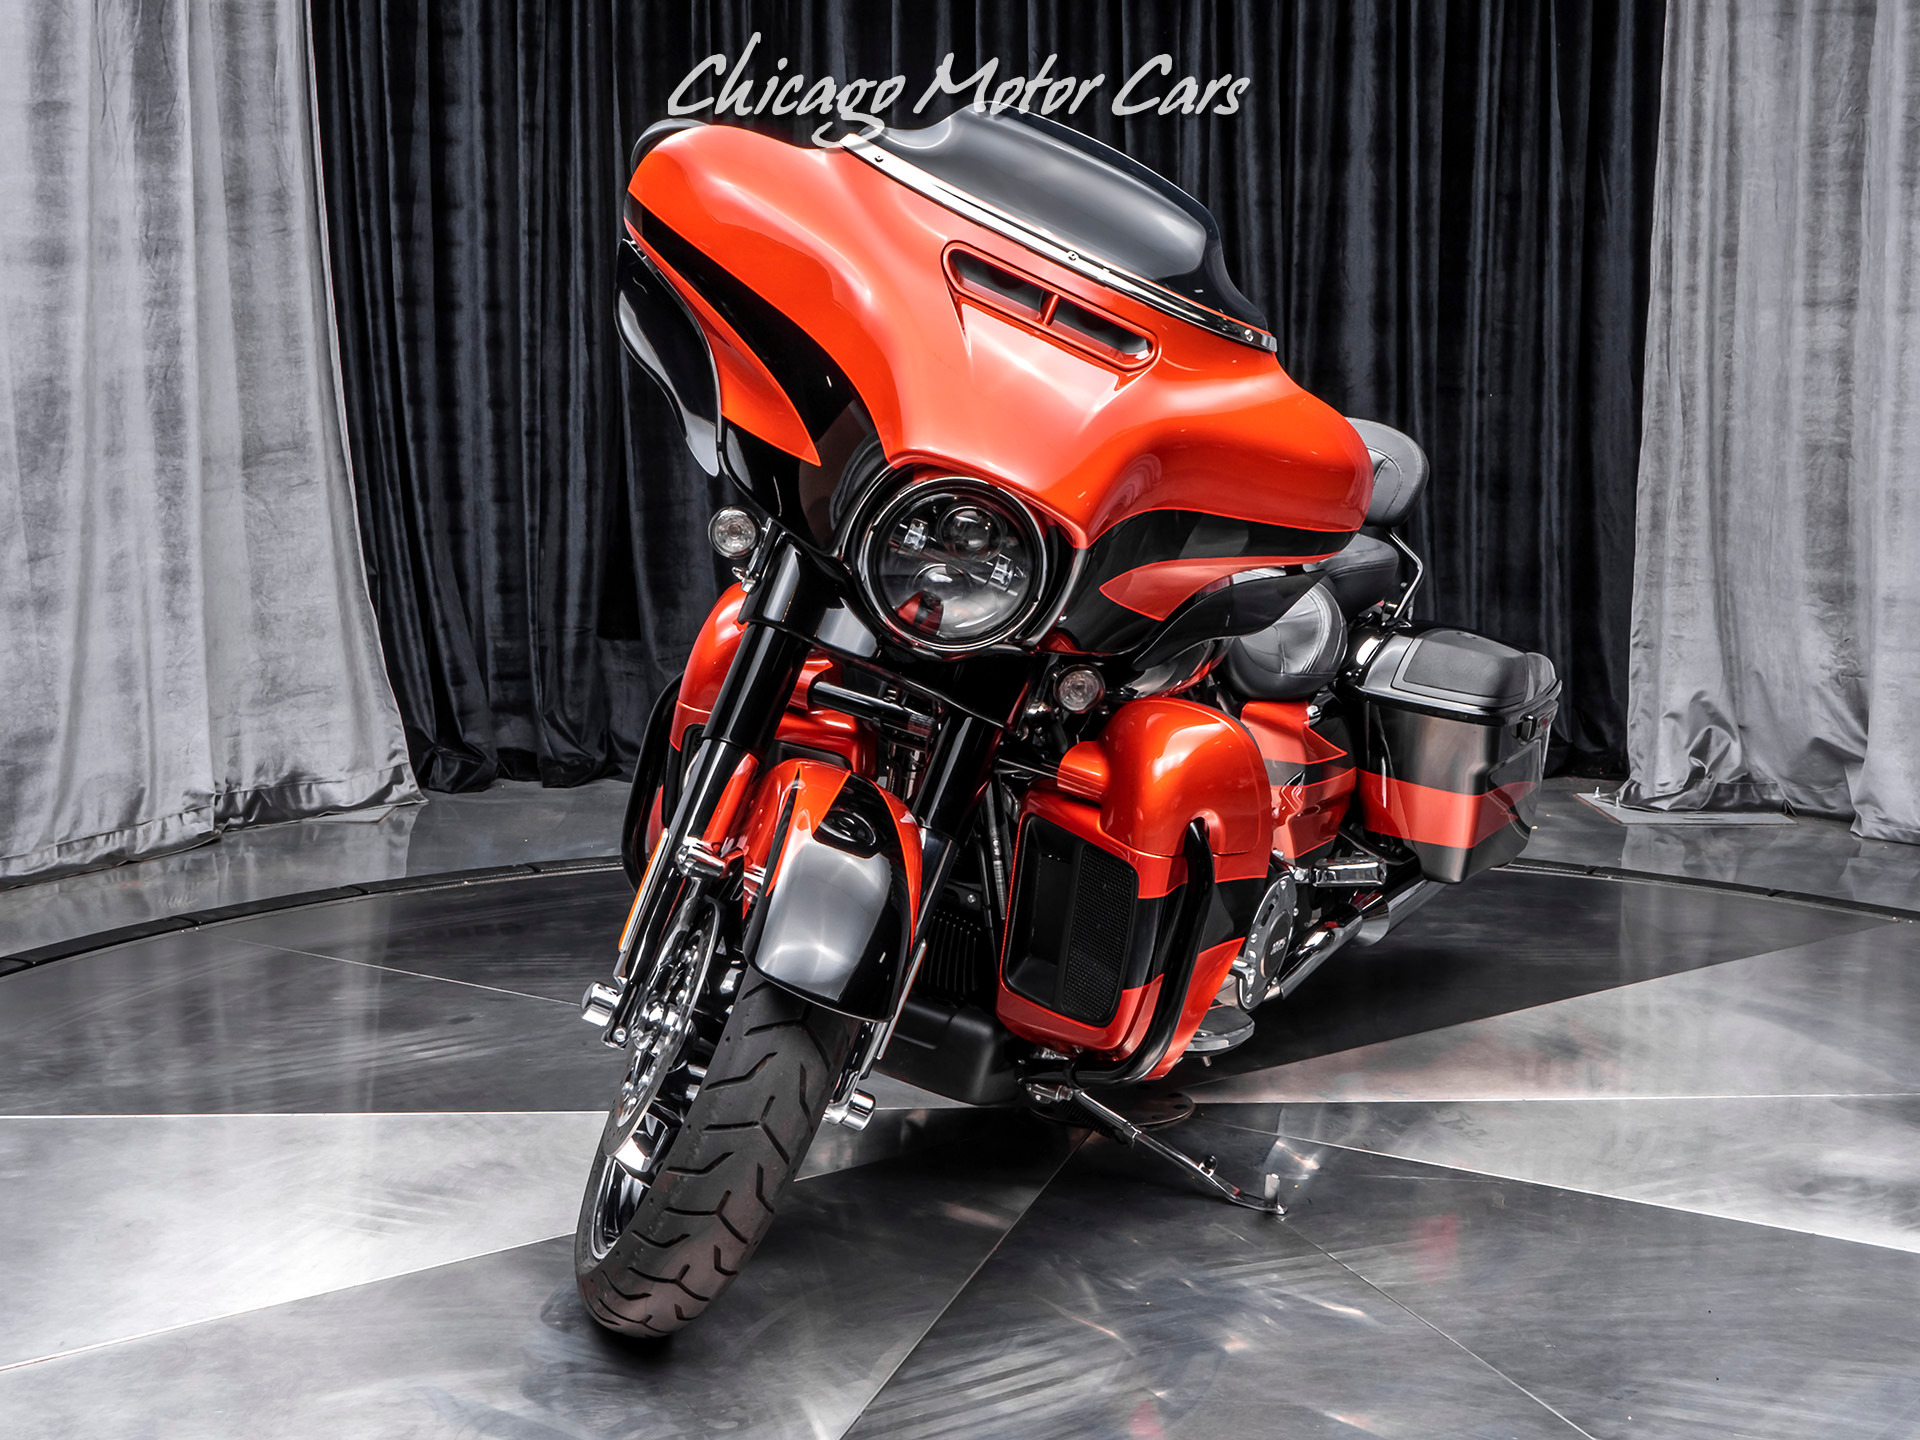 Used 2017 Harley Davidson Street Glide Cvo Stage Iii Hd Motor 117 For Sale Special Pricing Chicago Motor Cars Stock 16394